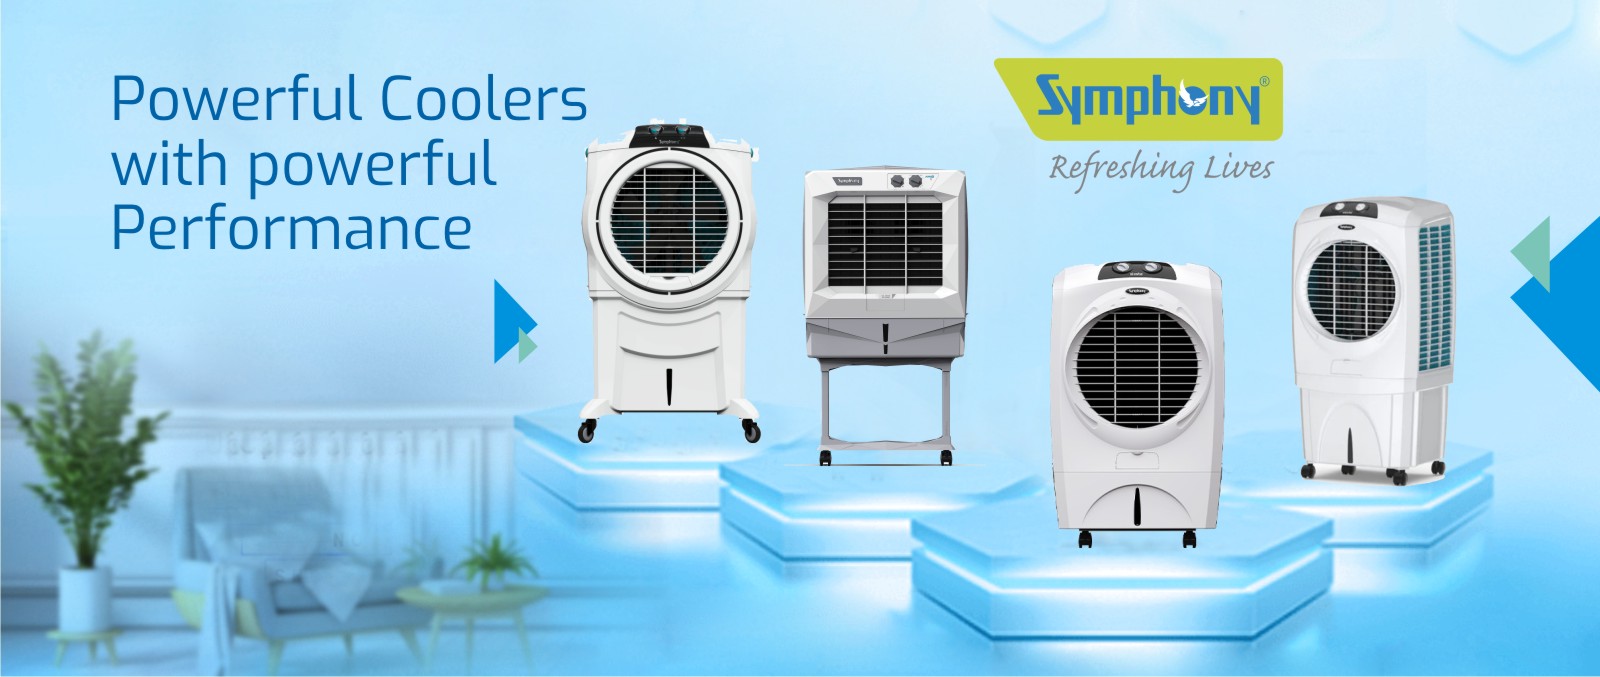 Symphony Coolers In Indore